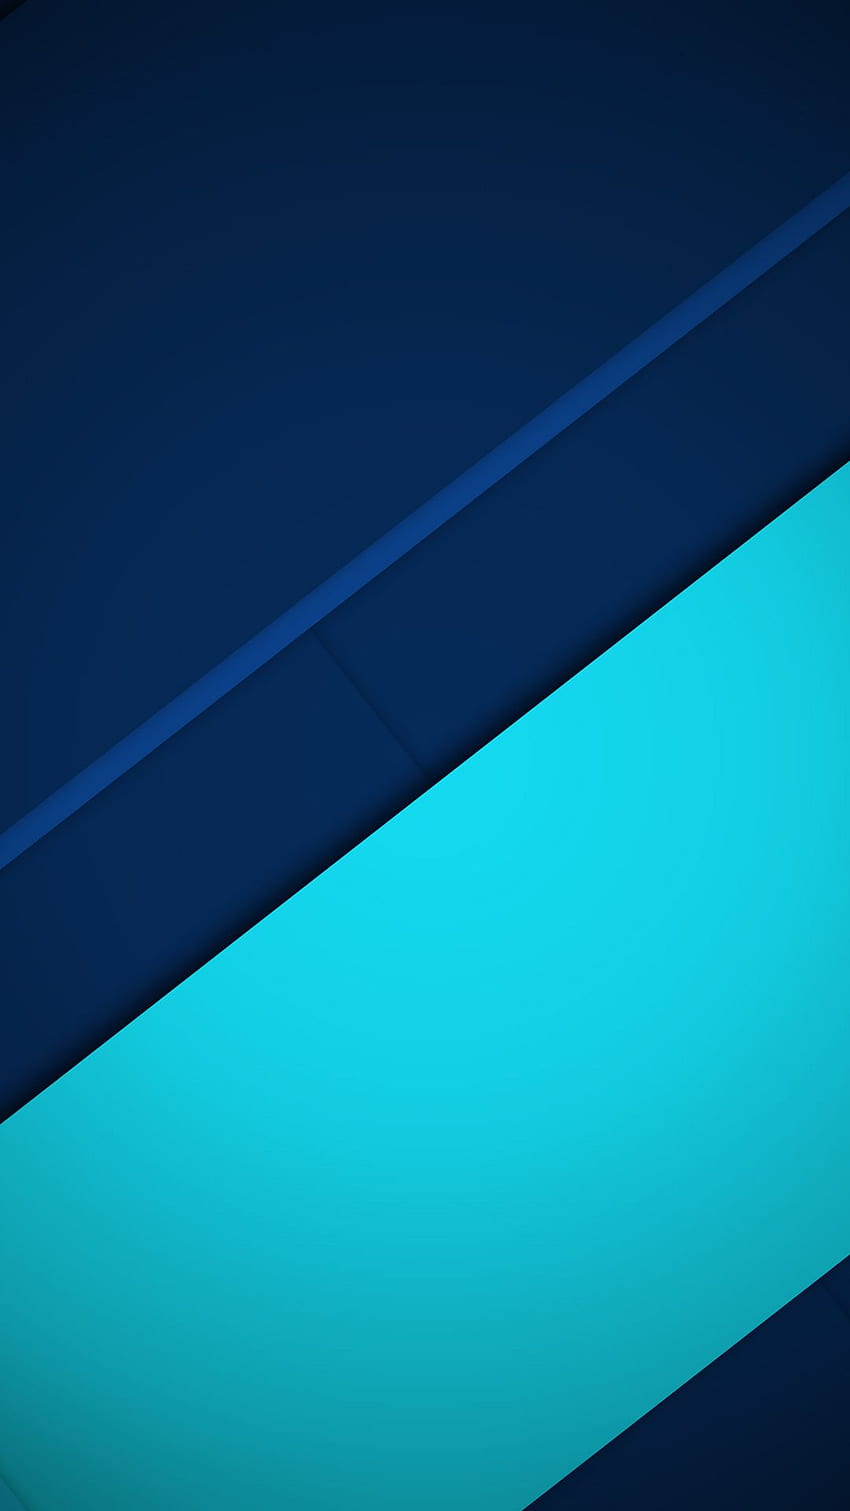 Modern Material Design and Abstract Background in High Resolution. Background phone , Cellphone , Material design, Material Blue HD phone wallpaper